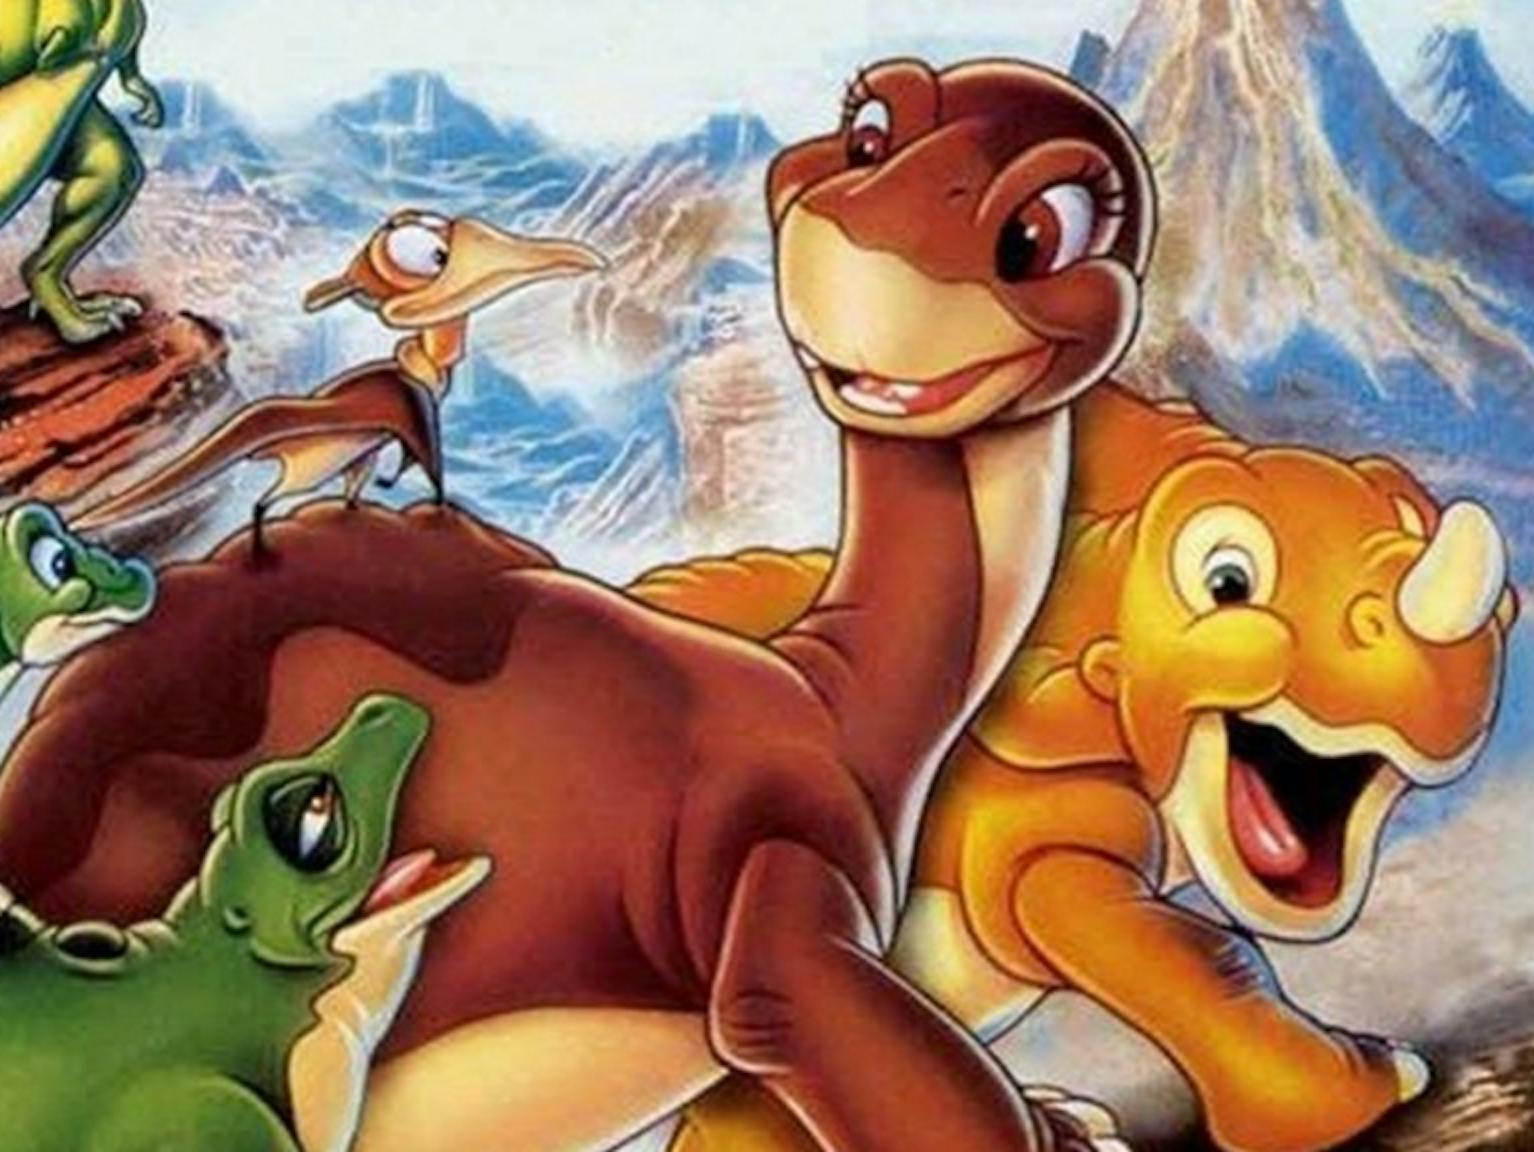 Amazing Frog Porn - 7 Things 'The Land Before Time' Gets Wrong About Dinosaurs ...